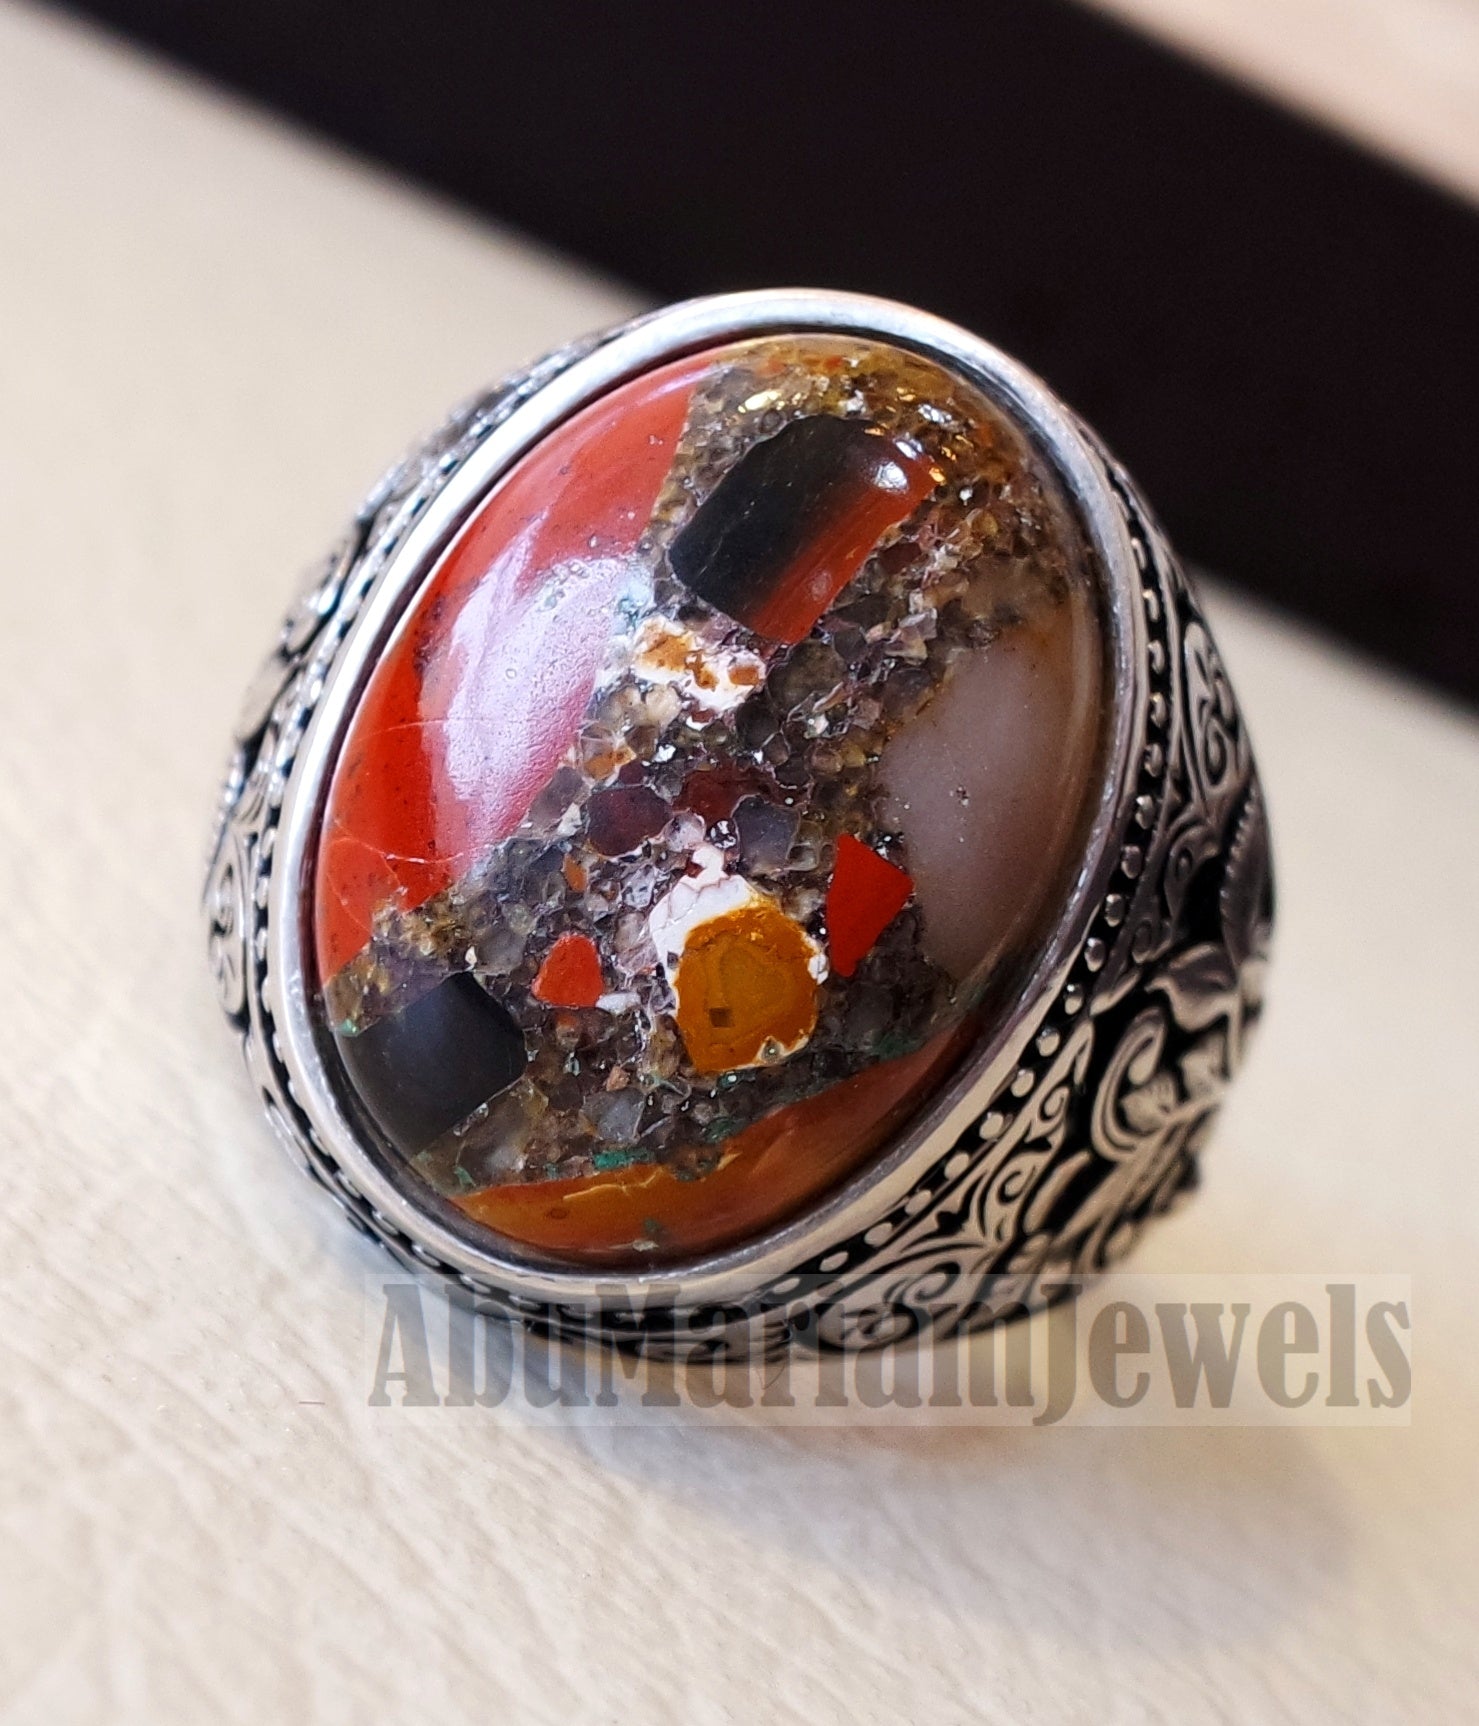 man ring Conglomerate natural stone sterling silver 925 oval cabochon semi precious ottoman style all sizes jewelry colors red brown white